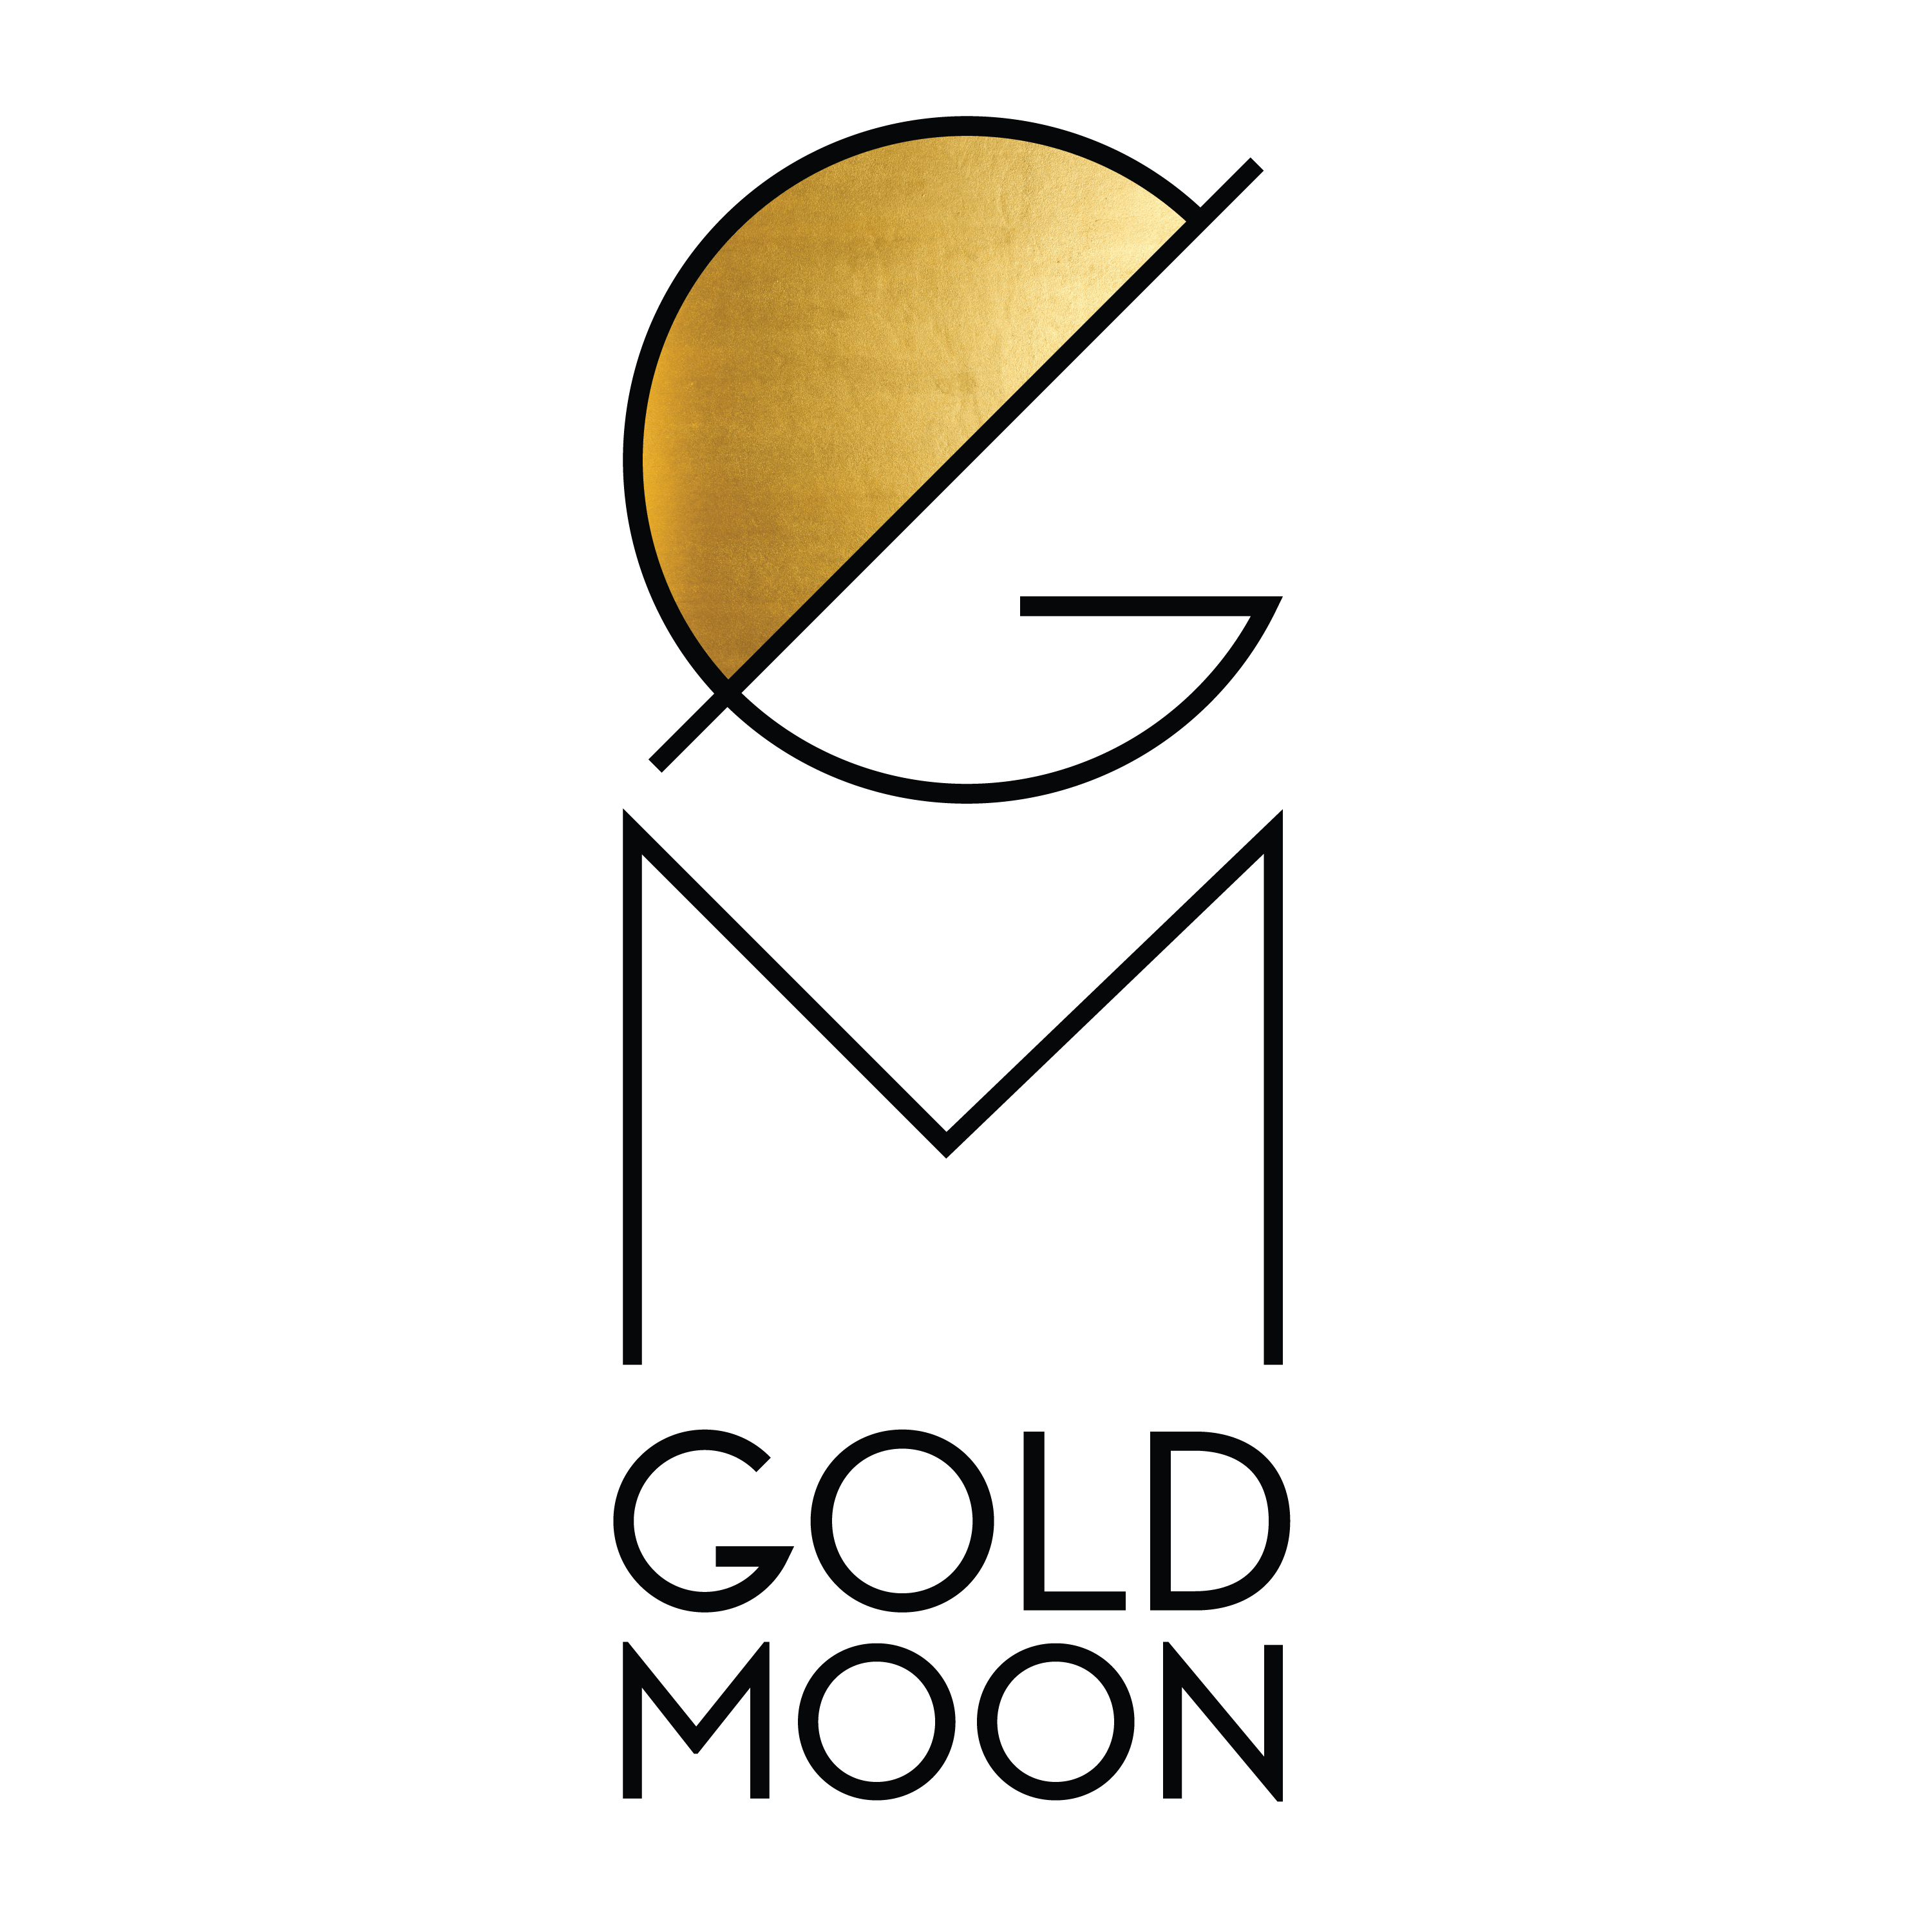 Gold Moon: Tropical Trainwreck (Jack Herer) Extract